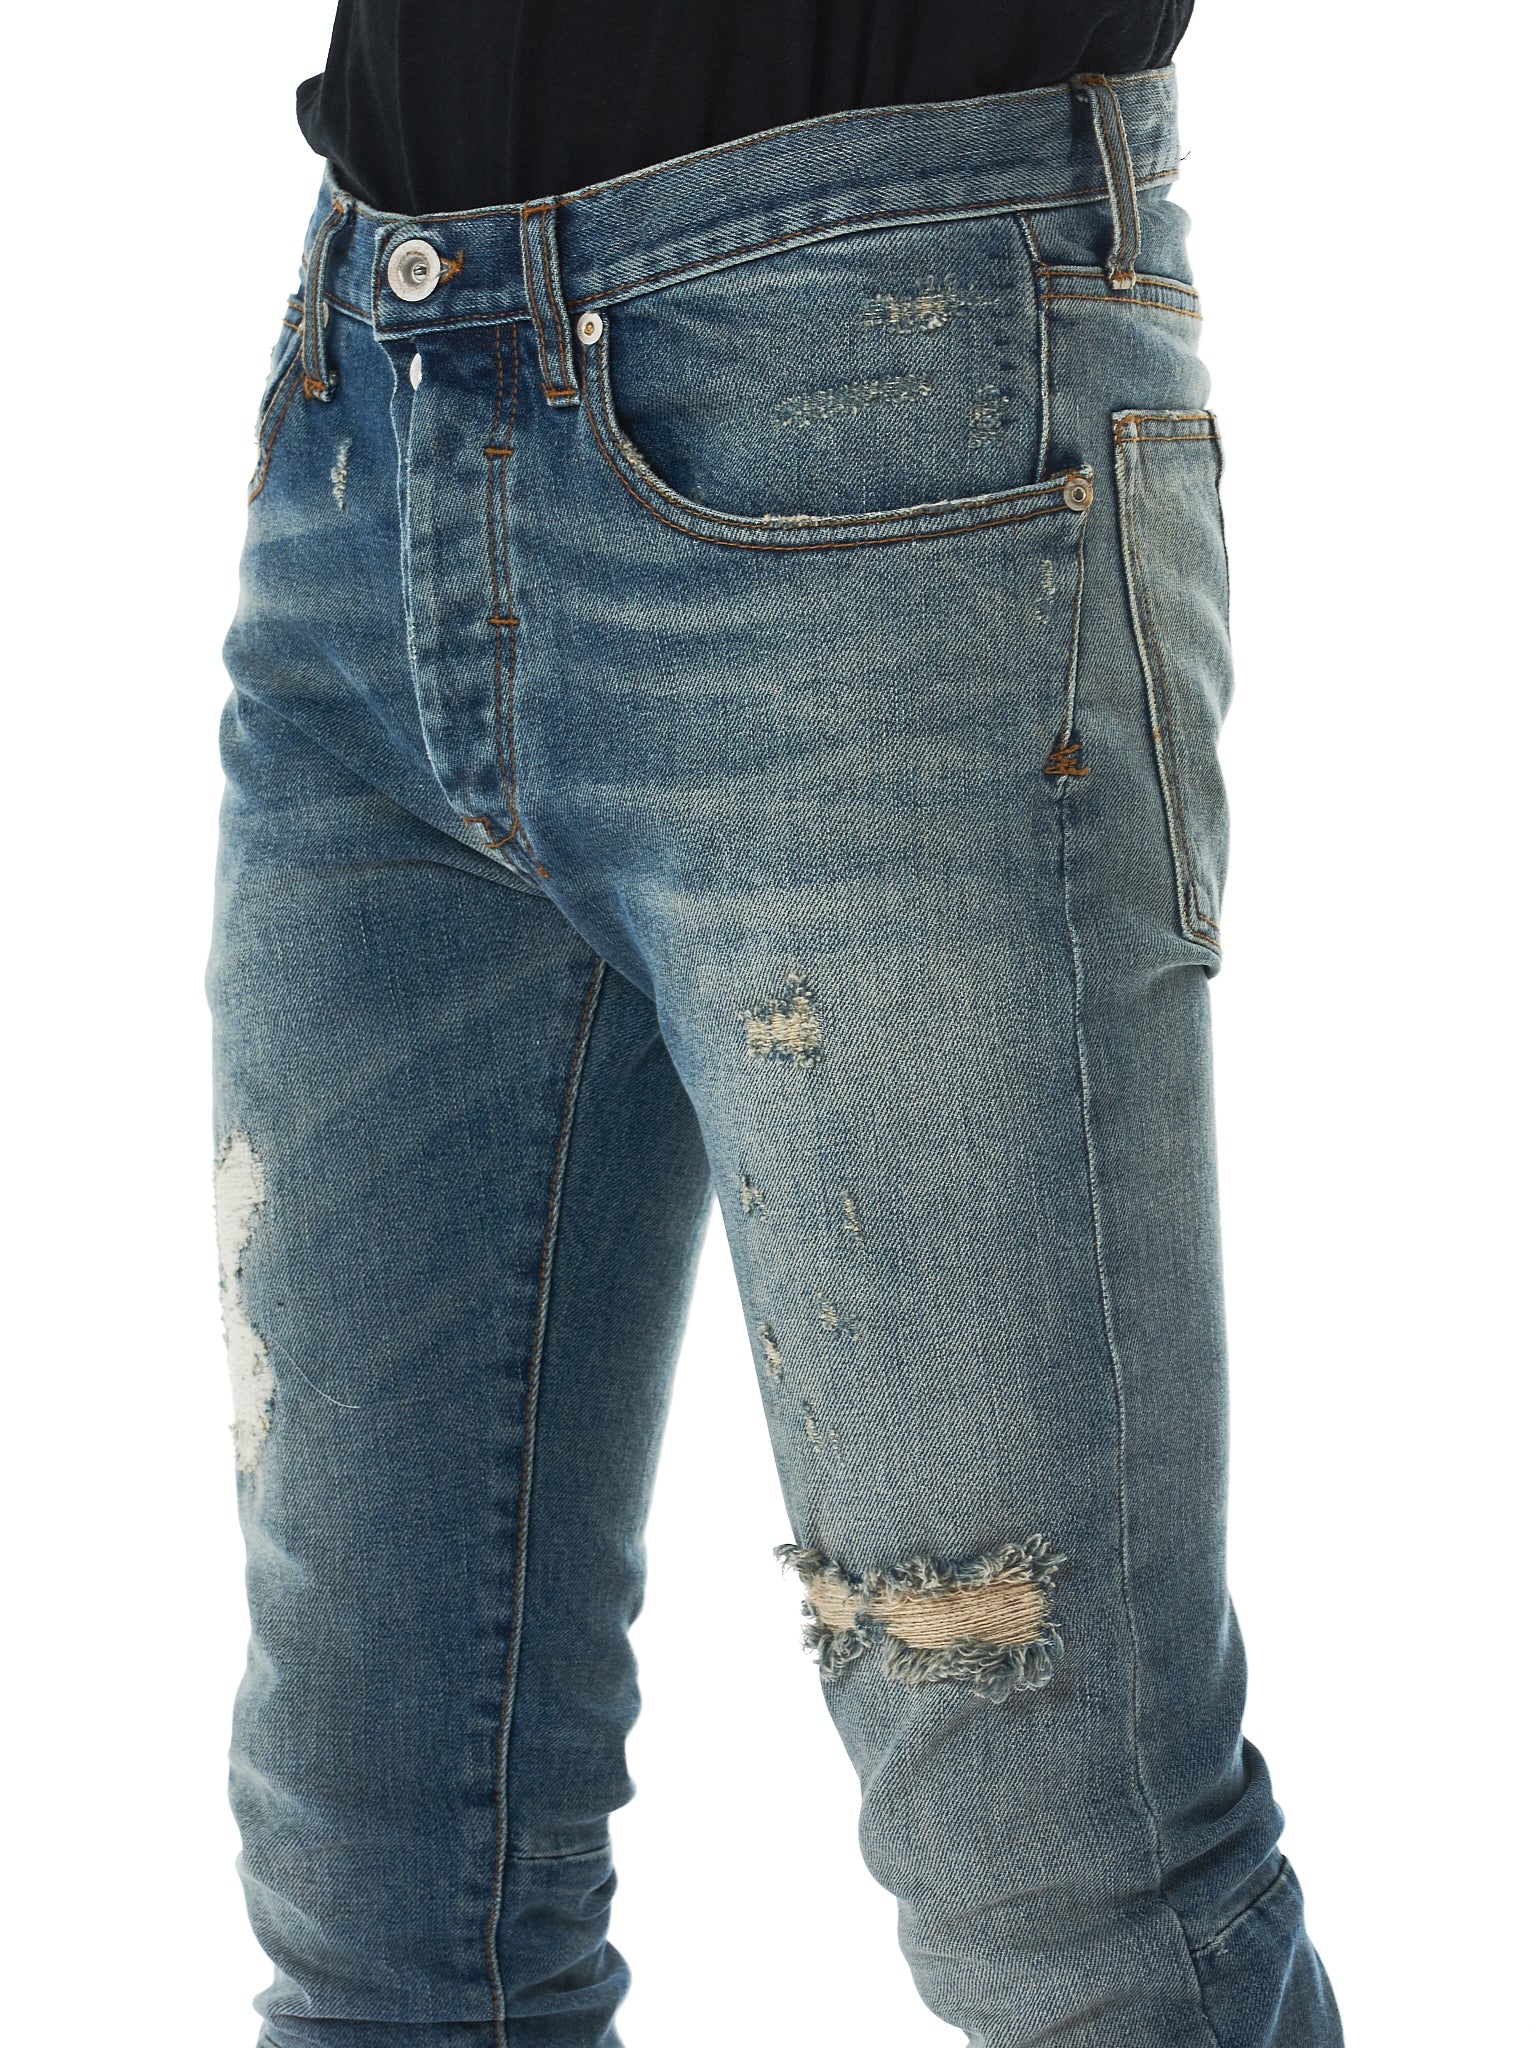 Unravel Distressed Jeans - Hlorenzo Detail 3